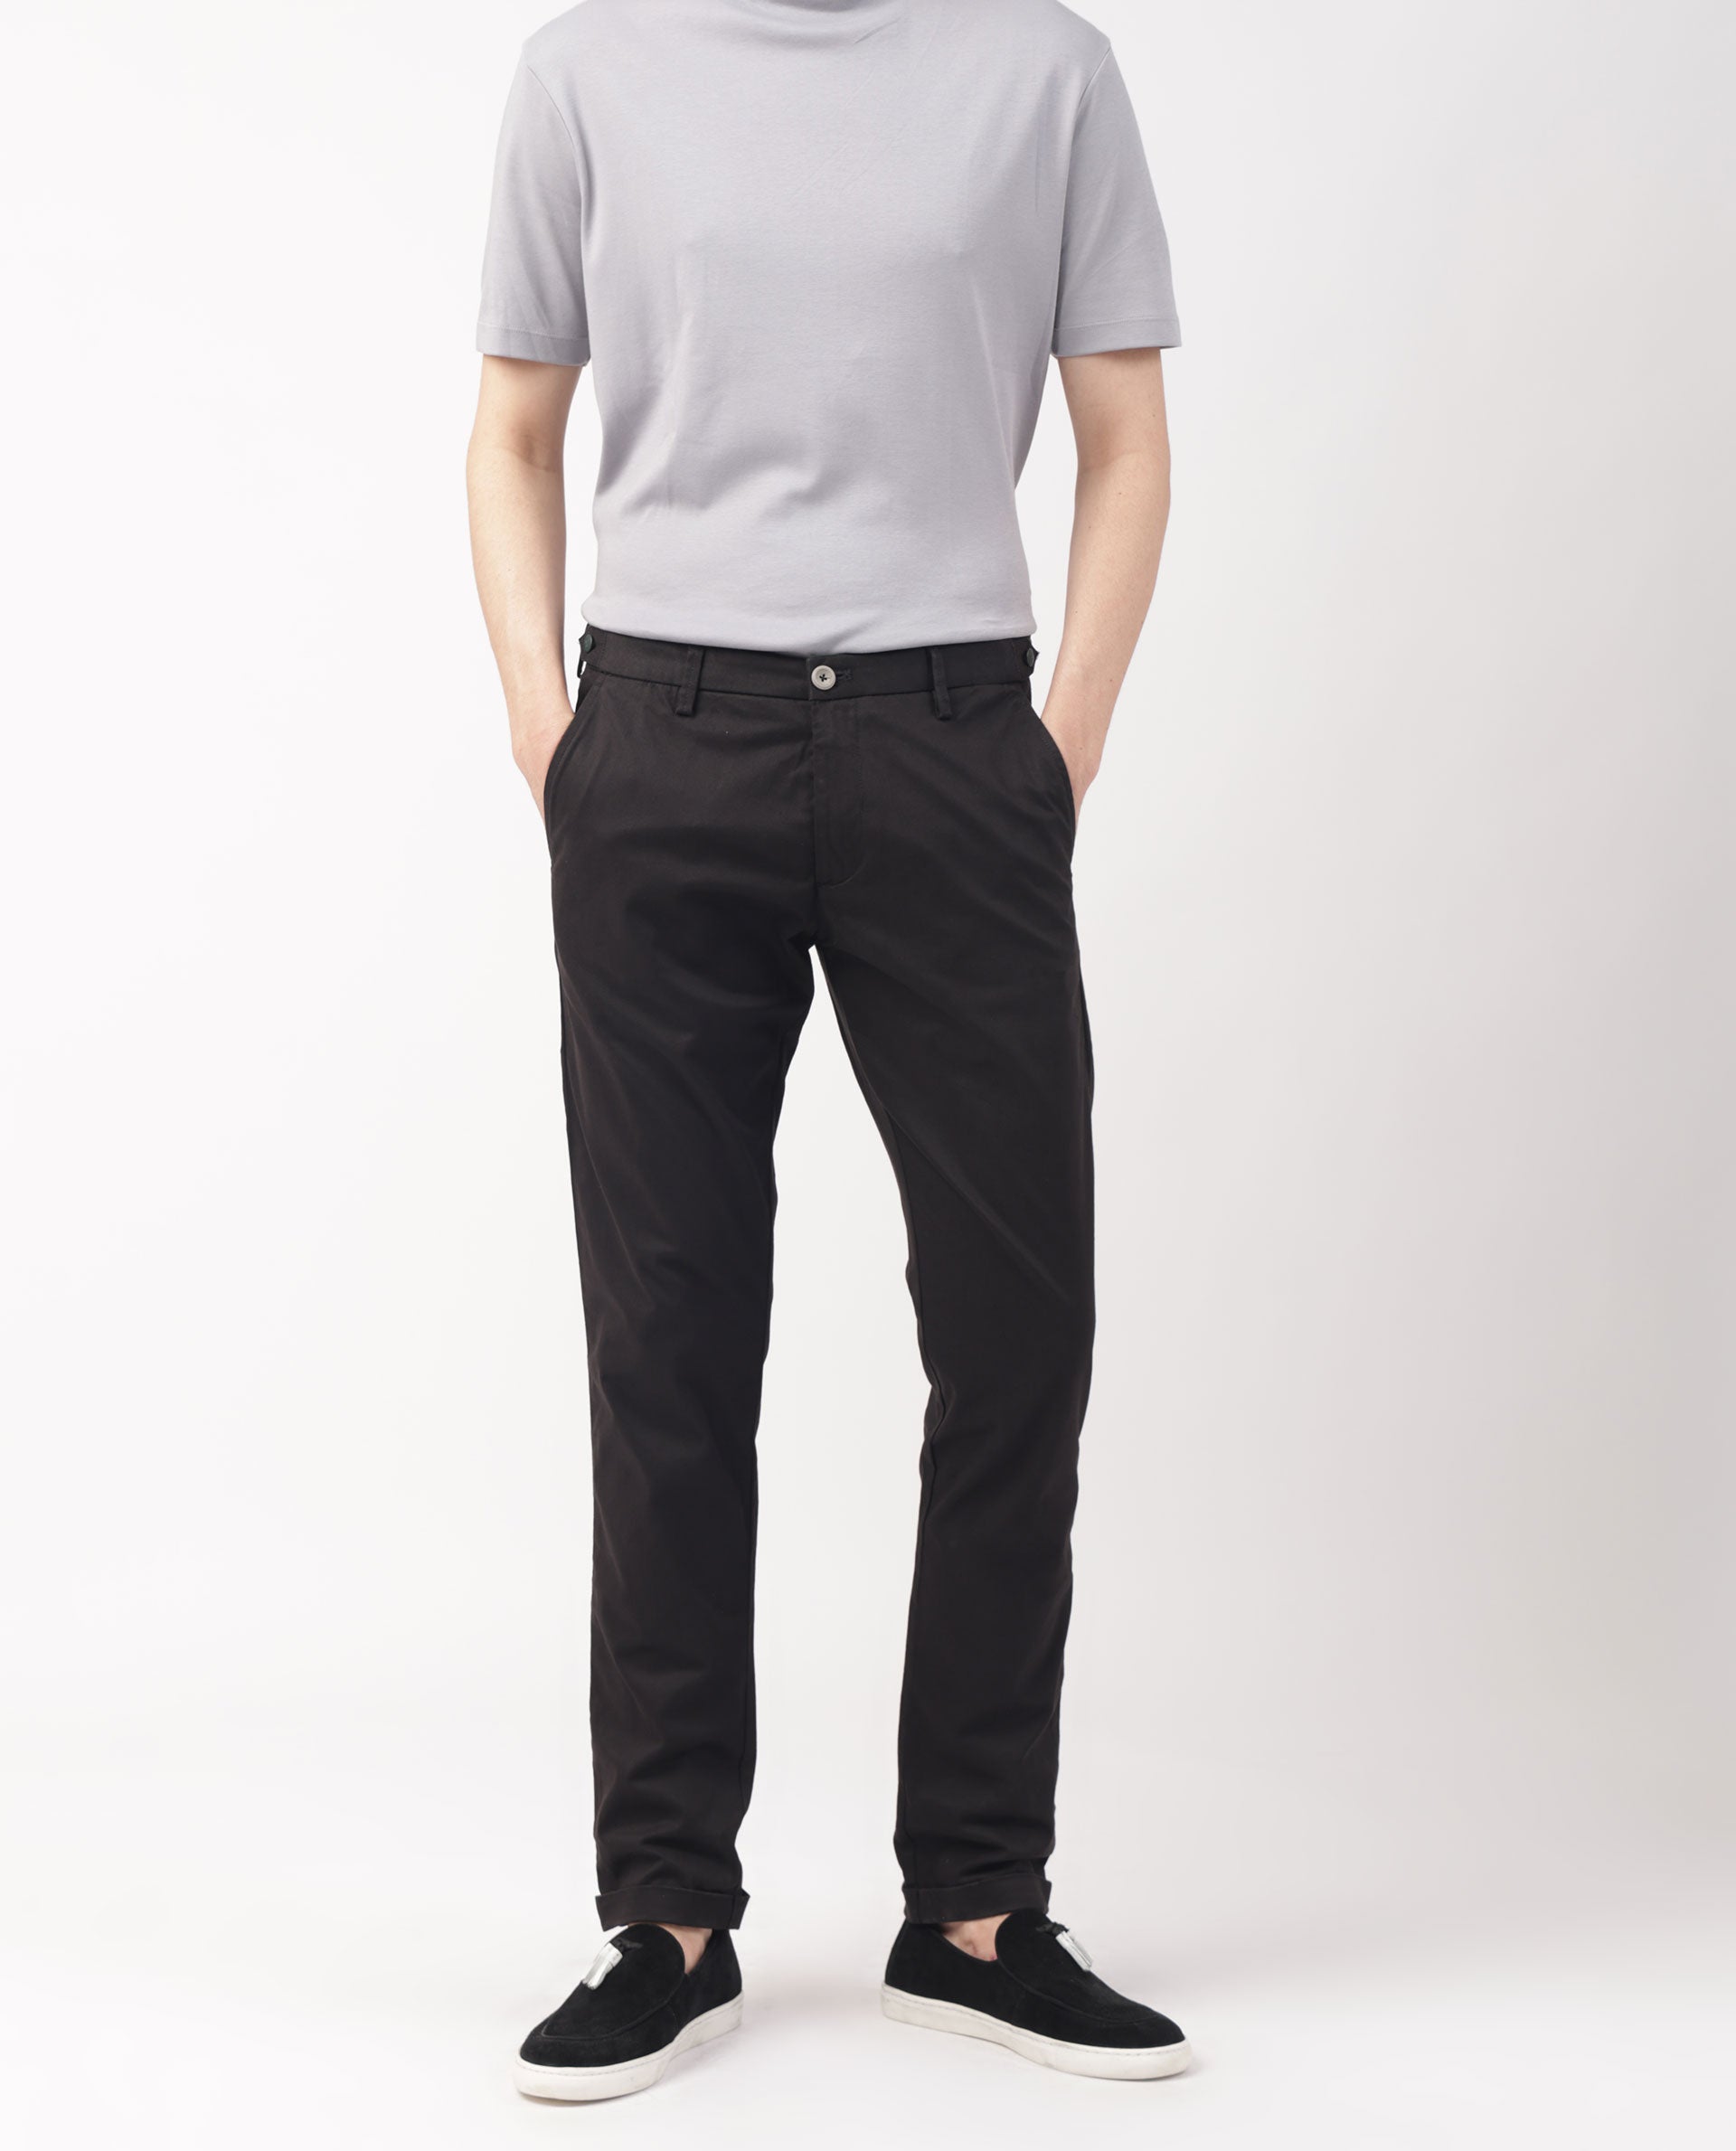 Chillin' Twill - Trousers for Boys | Element